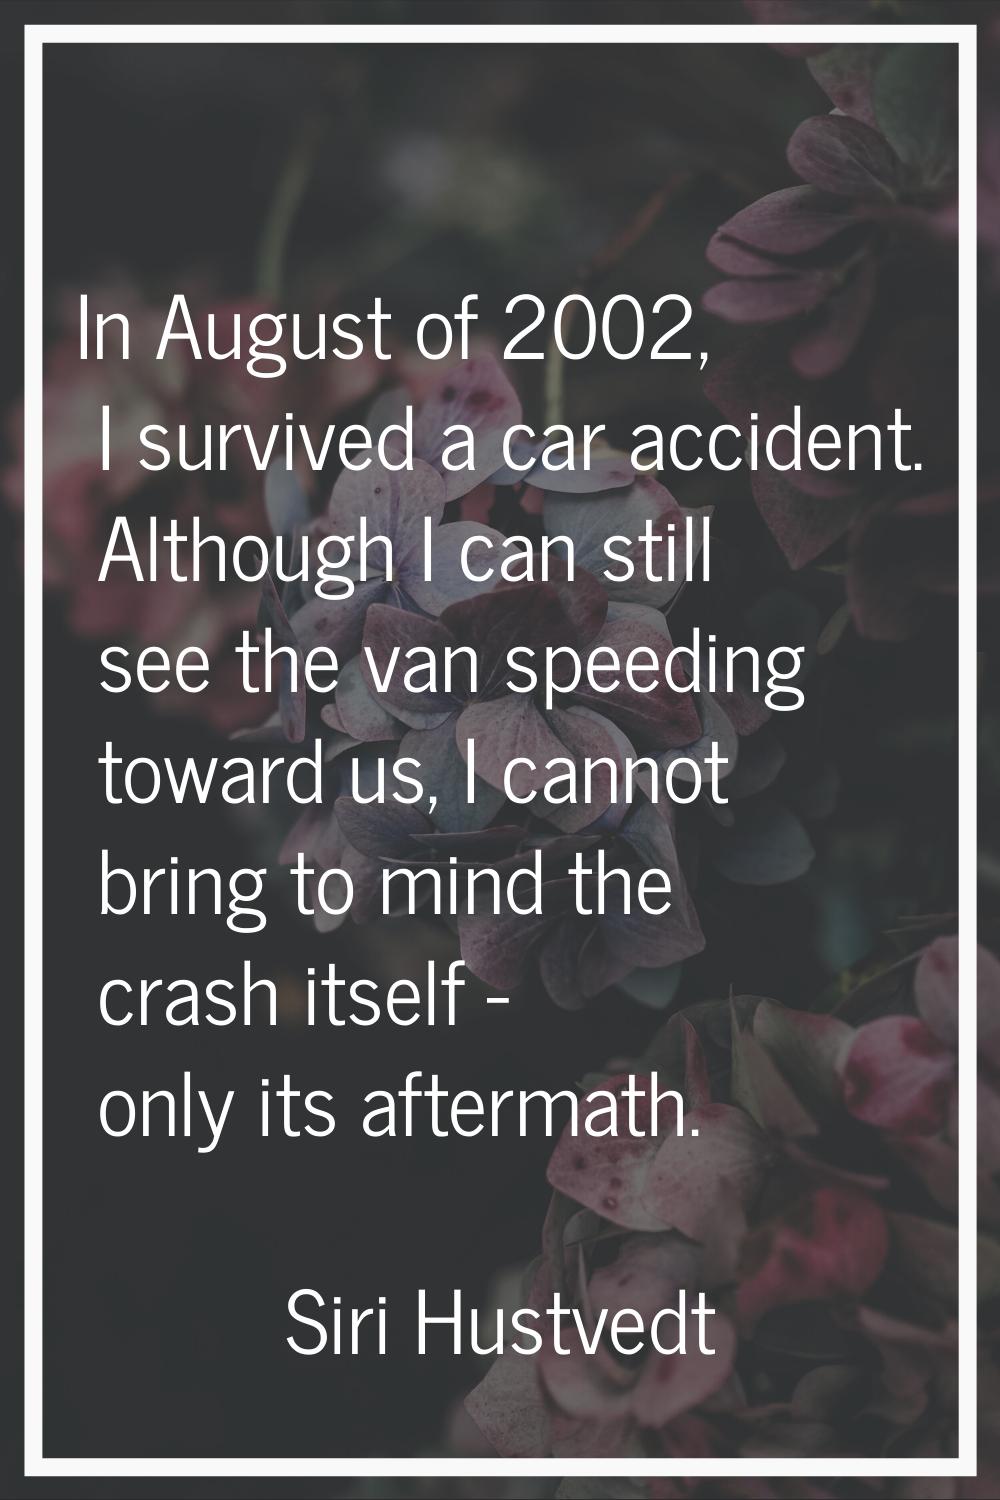 In August of 2002, I survived a car accident. Although I can still see the van speeding toward us, 